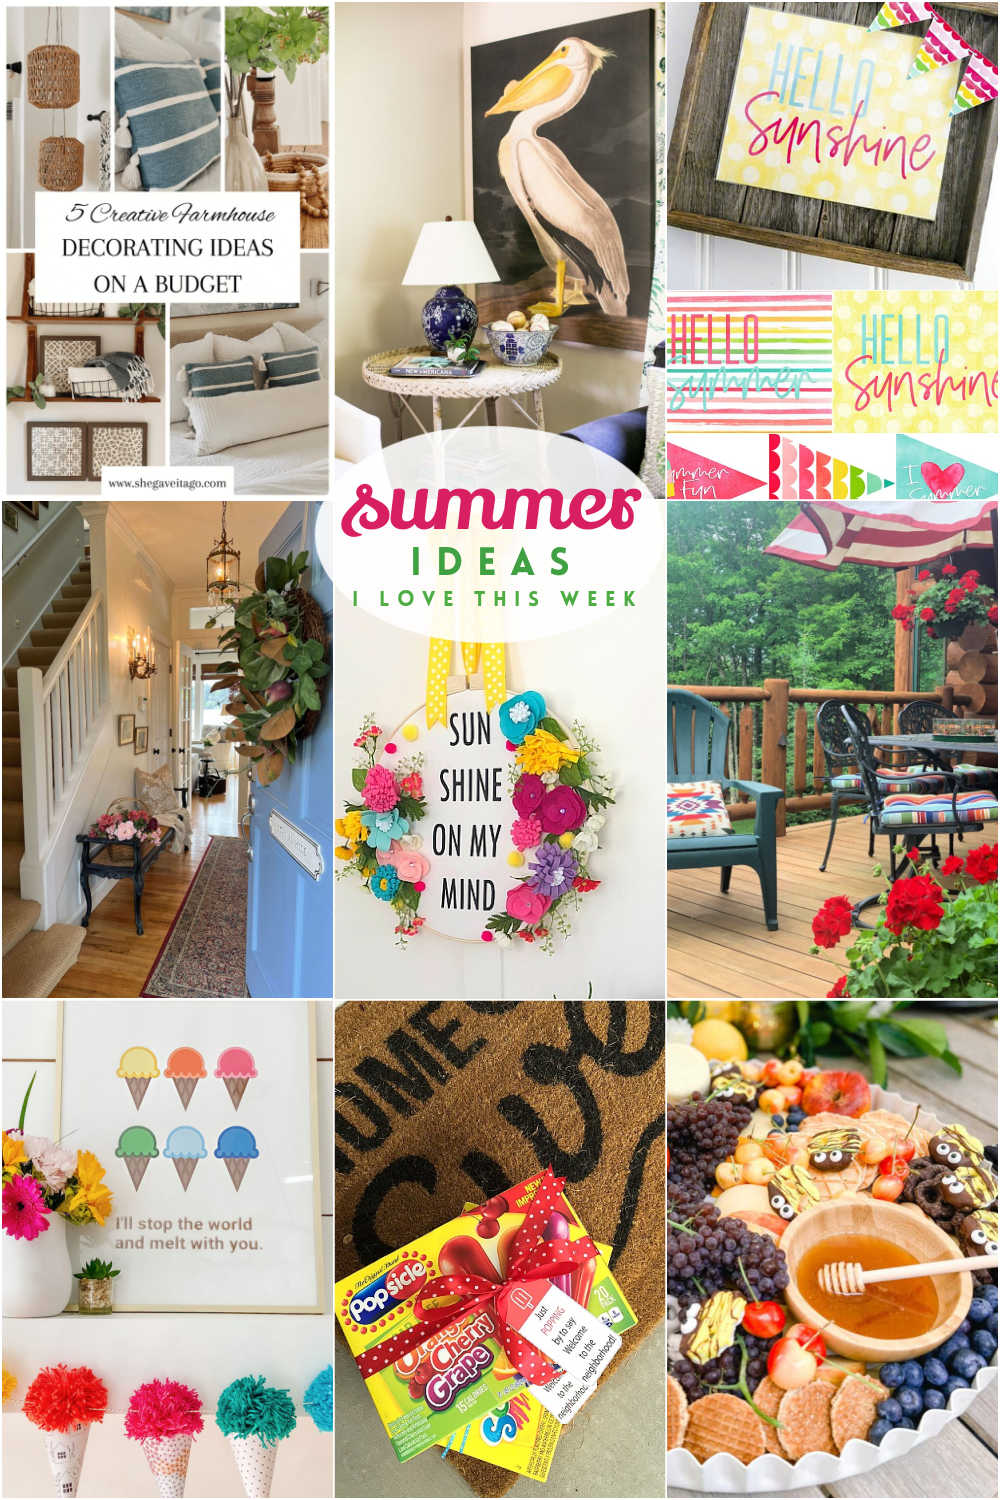 Summer Ideas I Love This Week! Enjoy summer to the fullest with these budget-friendly decorating and entertaining ideas! 